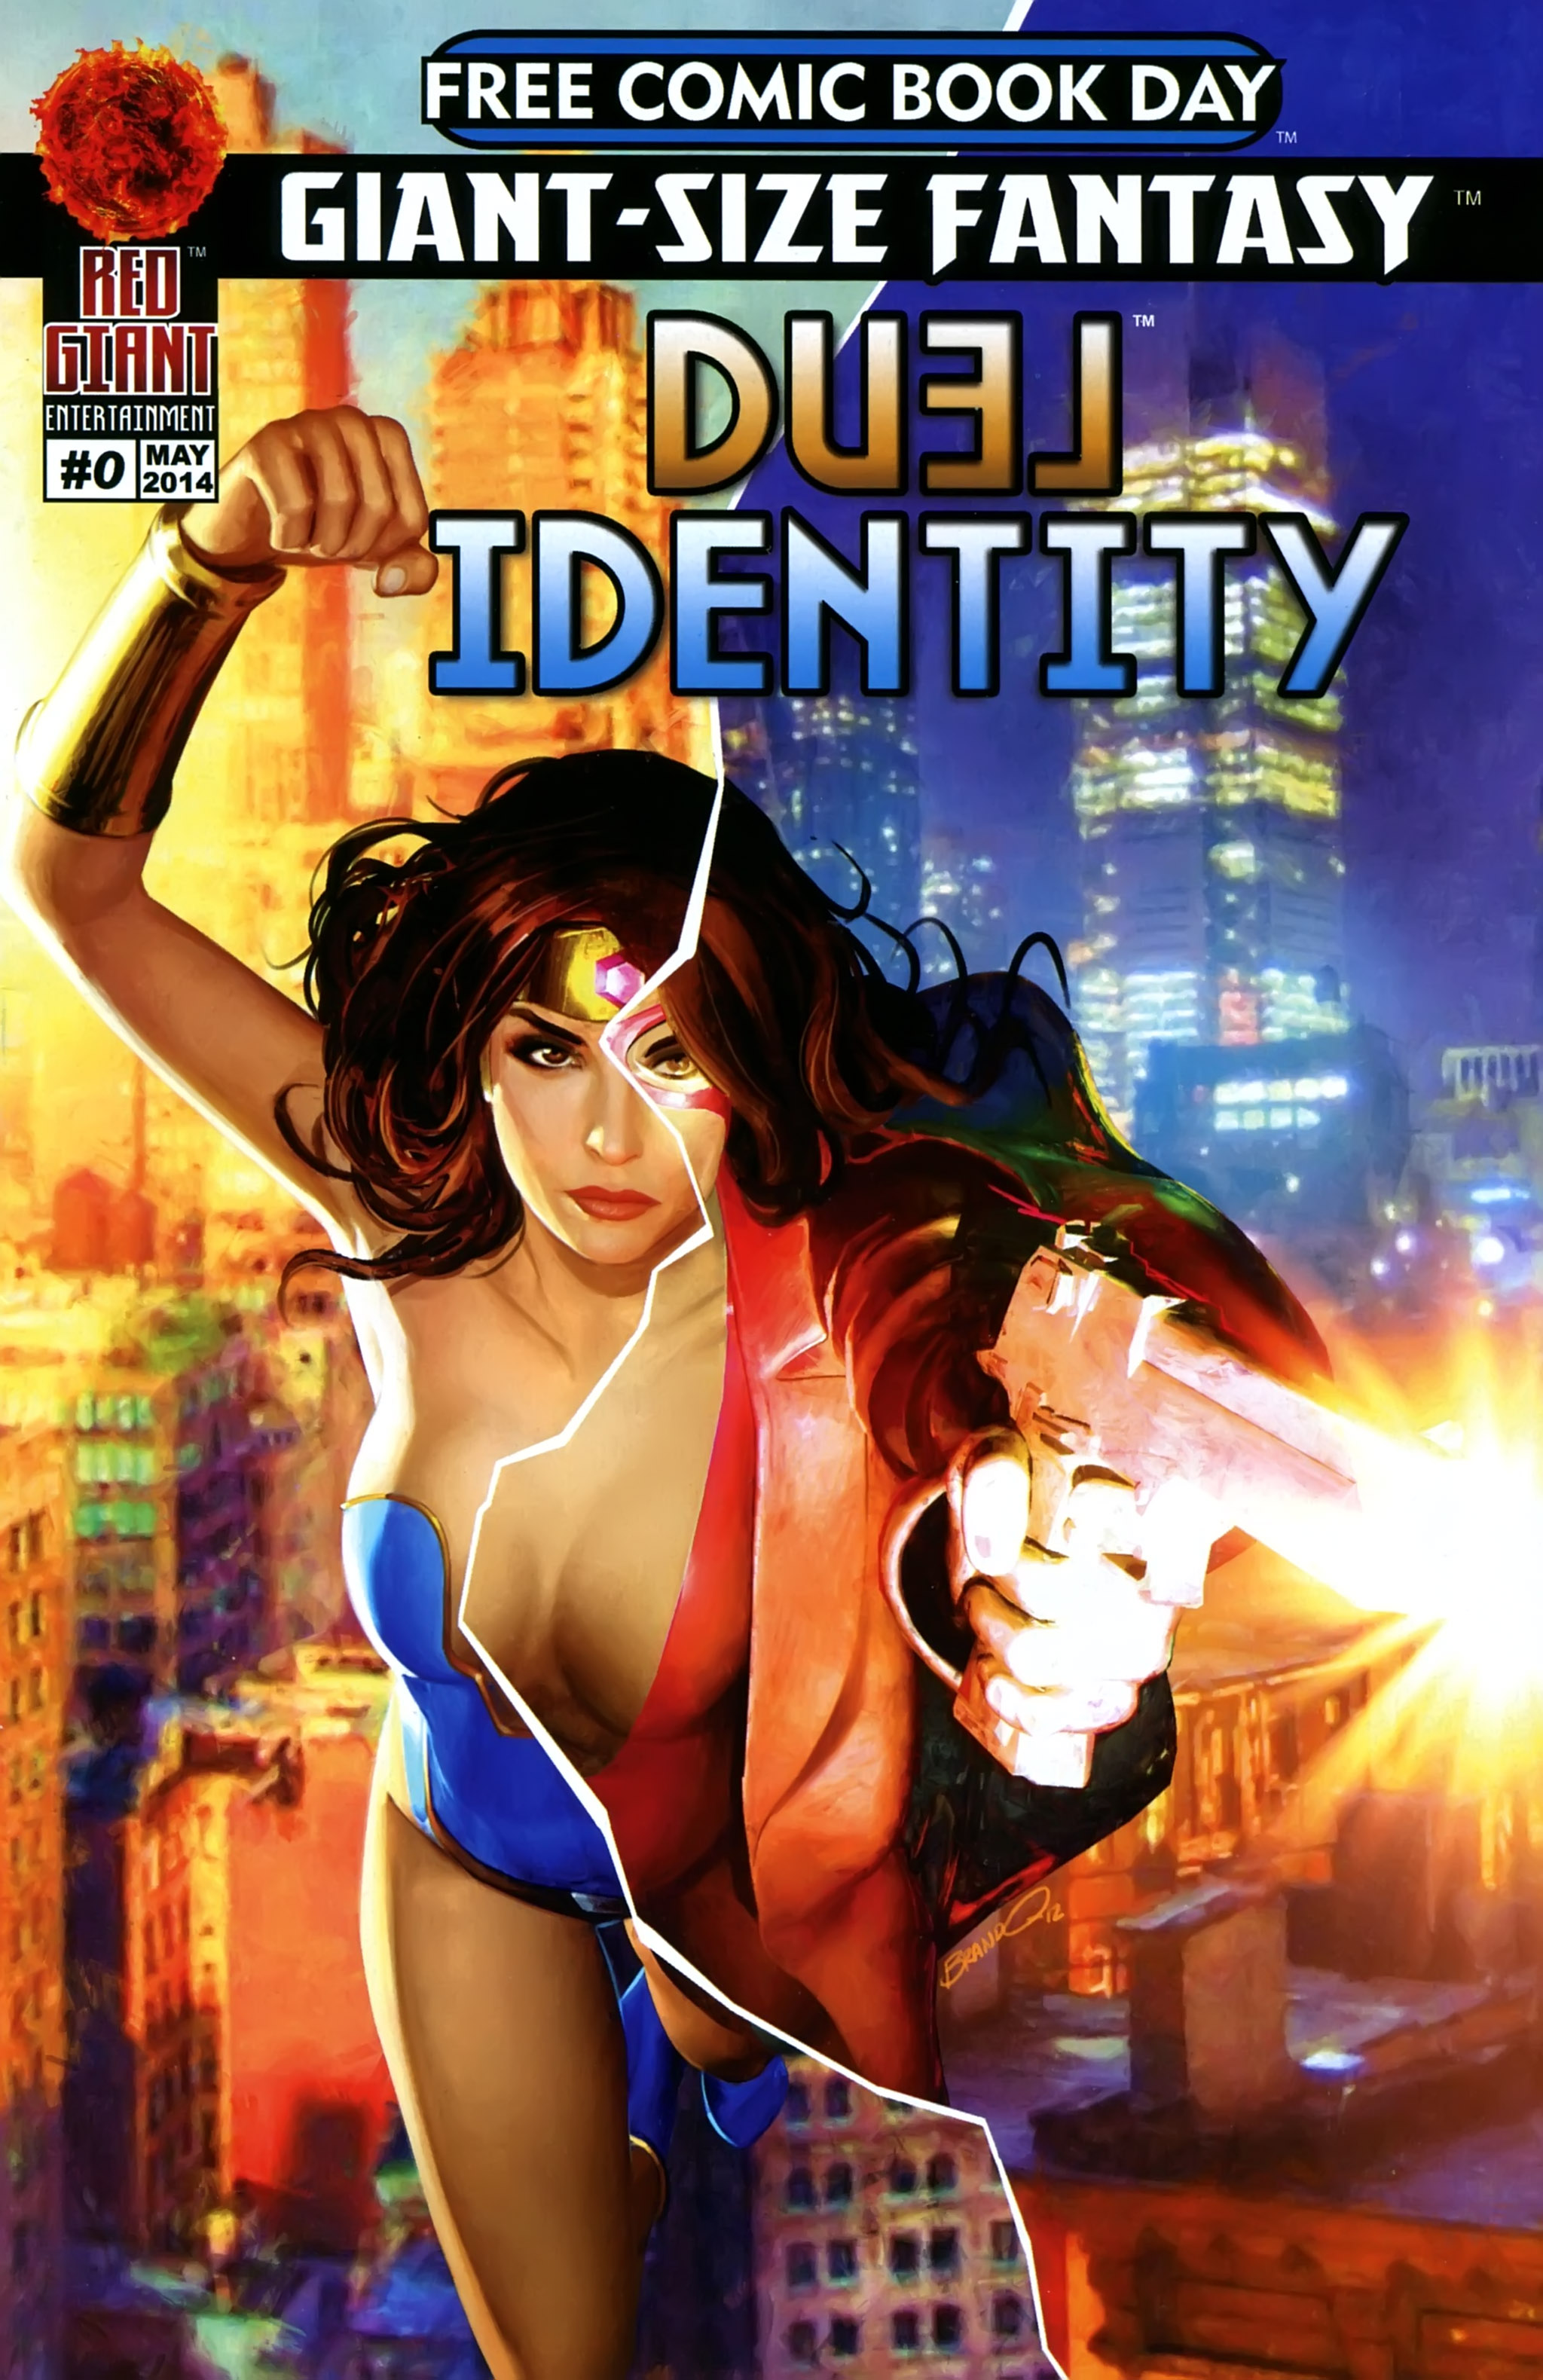 Read online Free Comic Book Day 2014 comic -  Issue # Red Giant - Giant Size Fantasy - Duel Identity & Pandora's Blogs Flipbook - 1